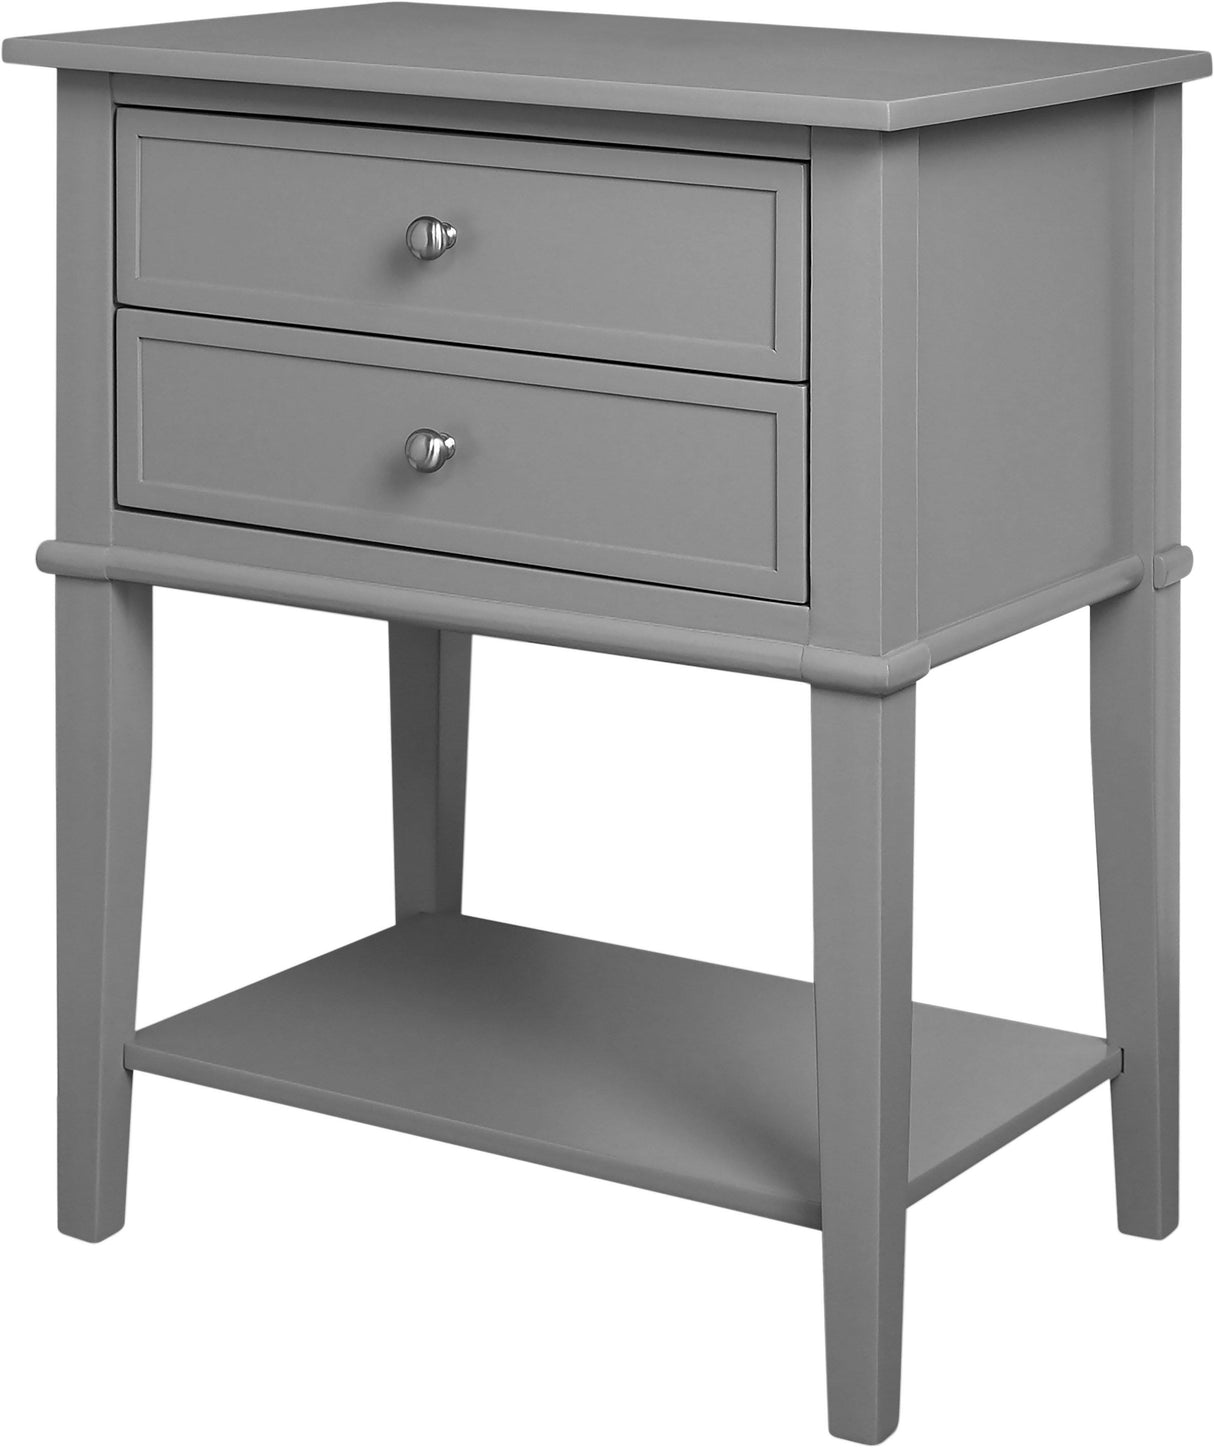 Dorel Home Franklin Range Accent Table in Grey